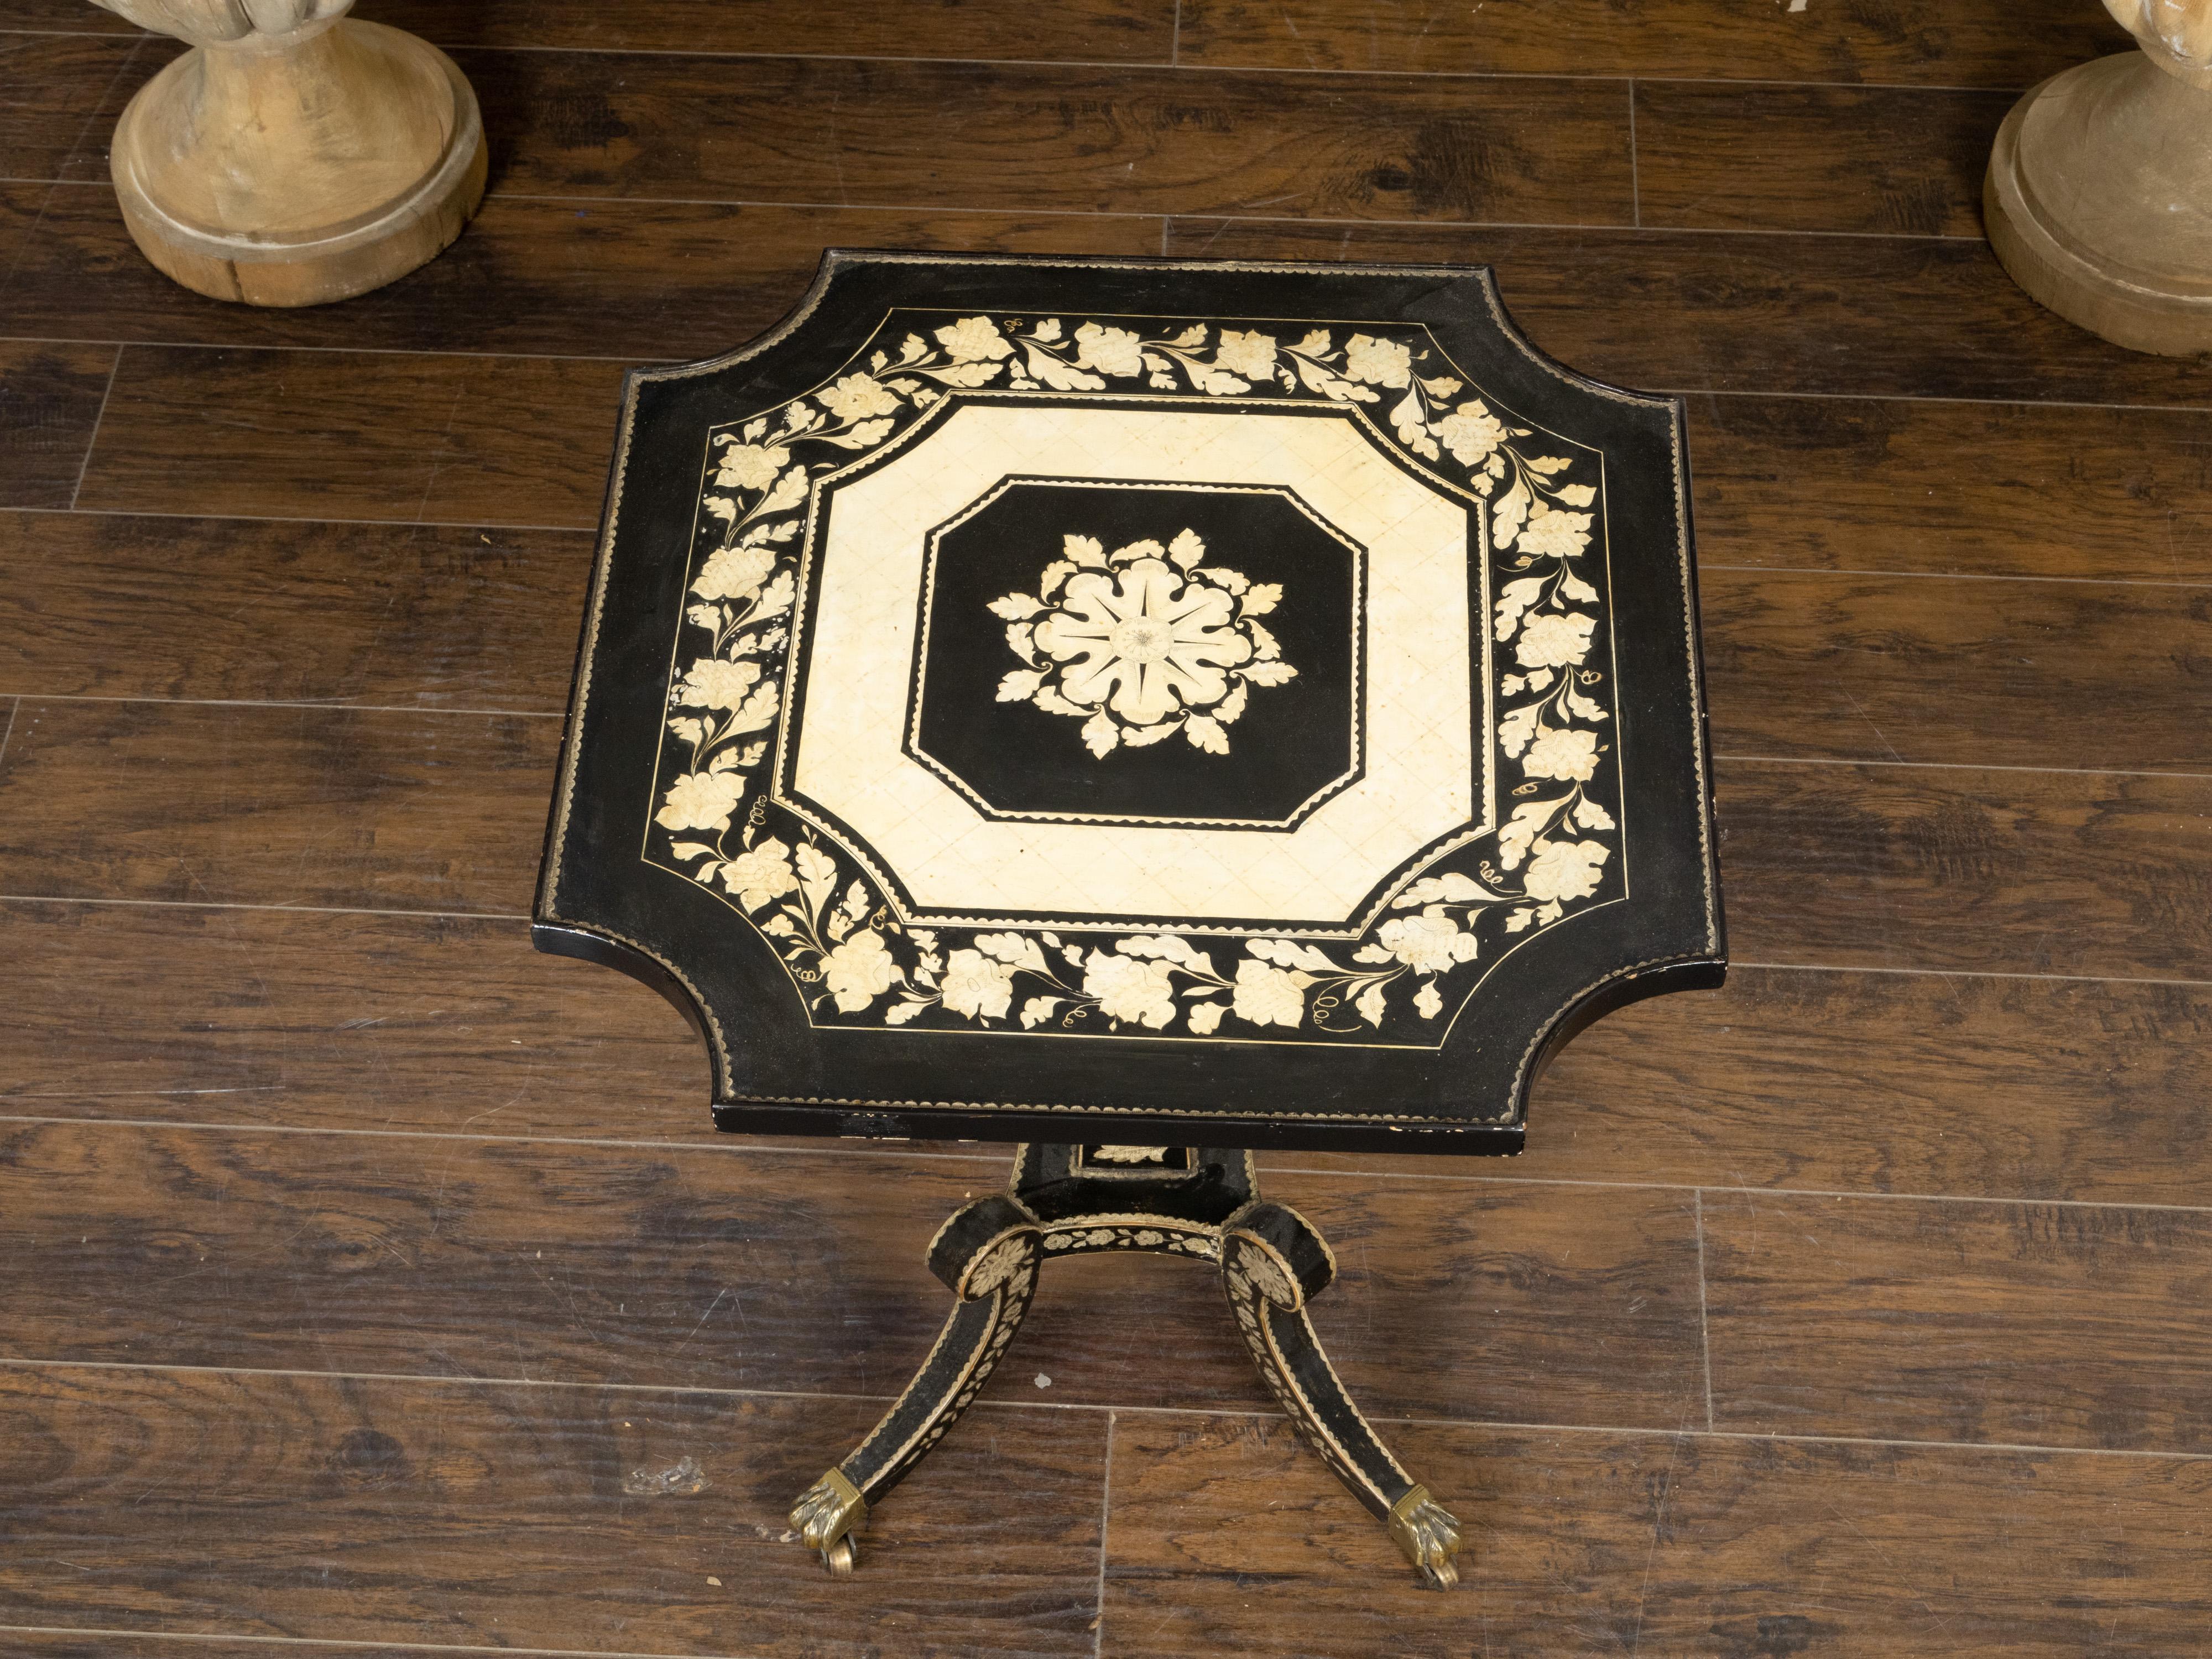 English Regency Penwork Occasional Table with Floral Décor and Curving Legs For Sale 1